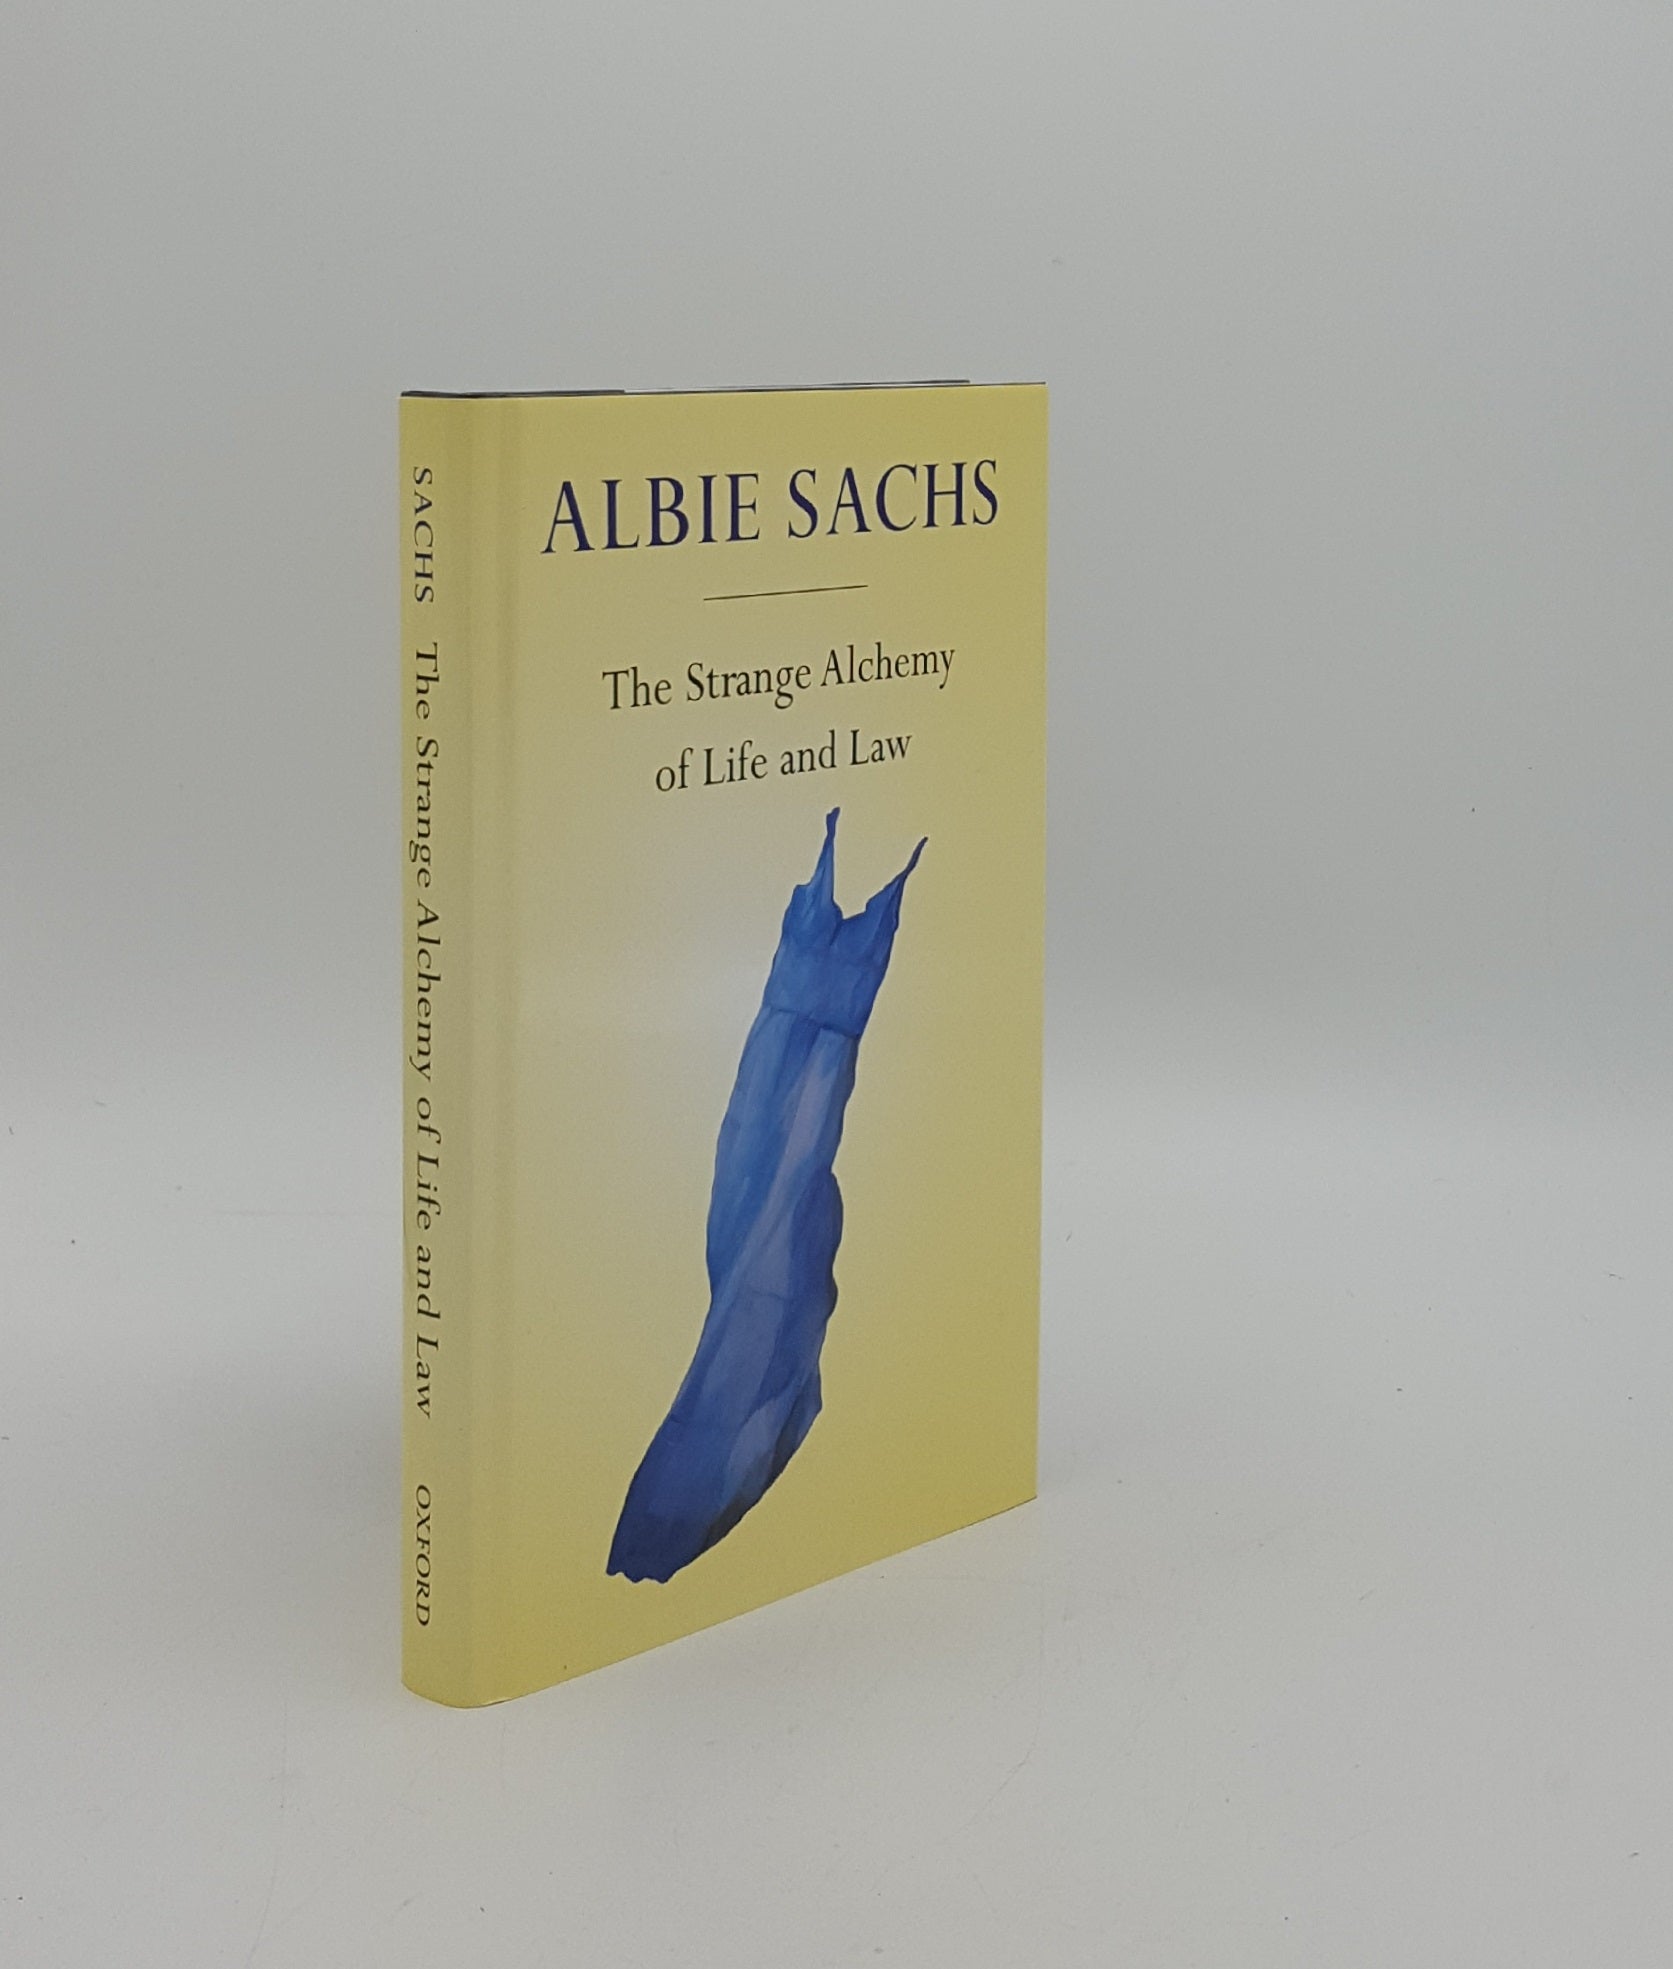 SACHS Justice Albie - The Strange Alchemy of Life and Law